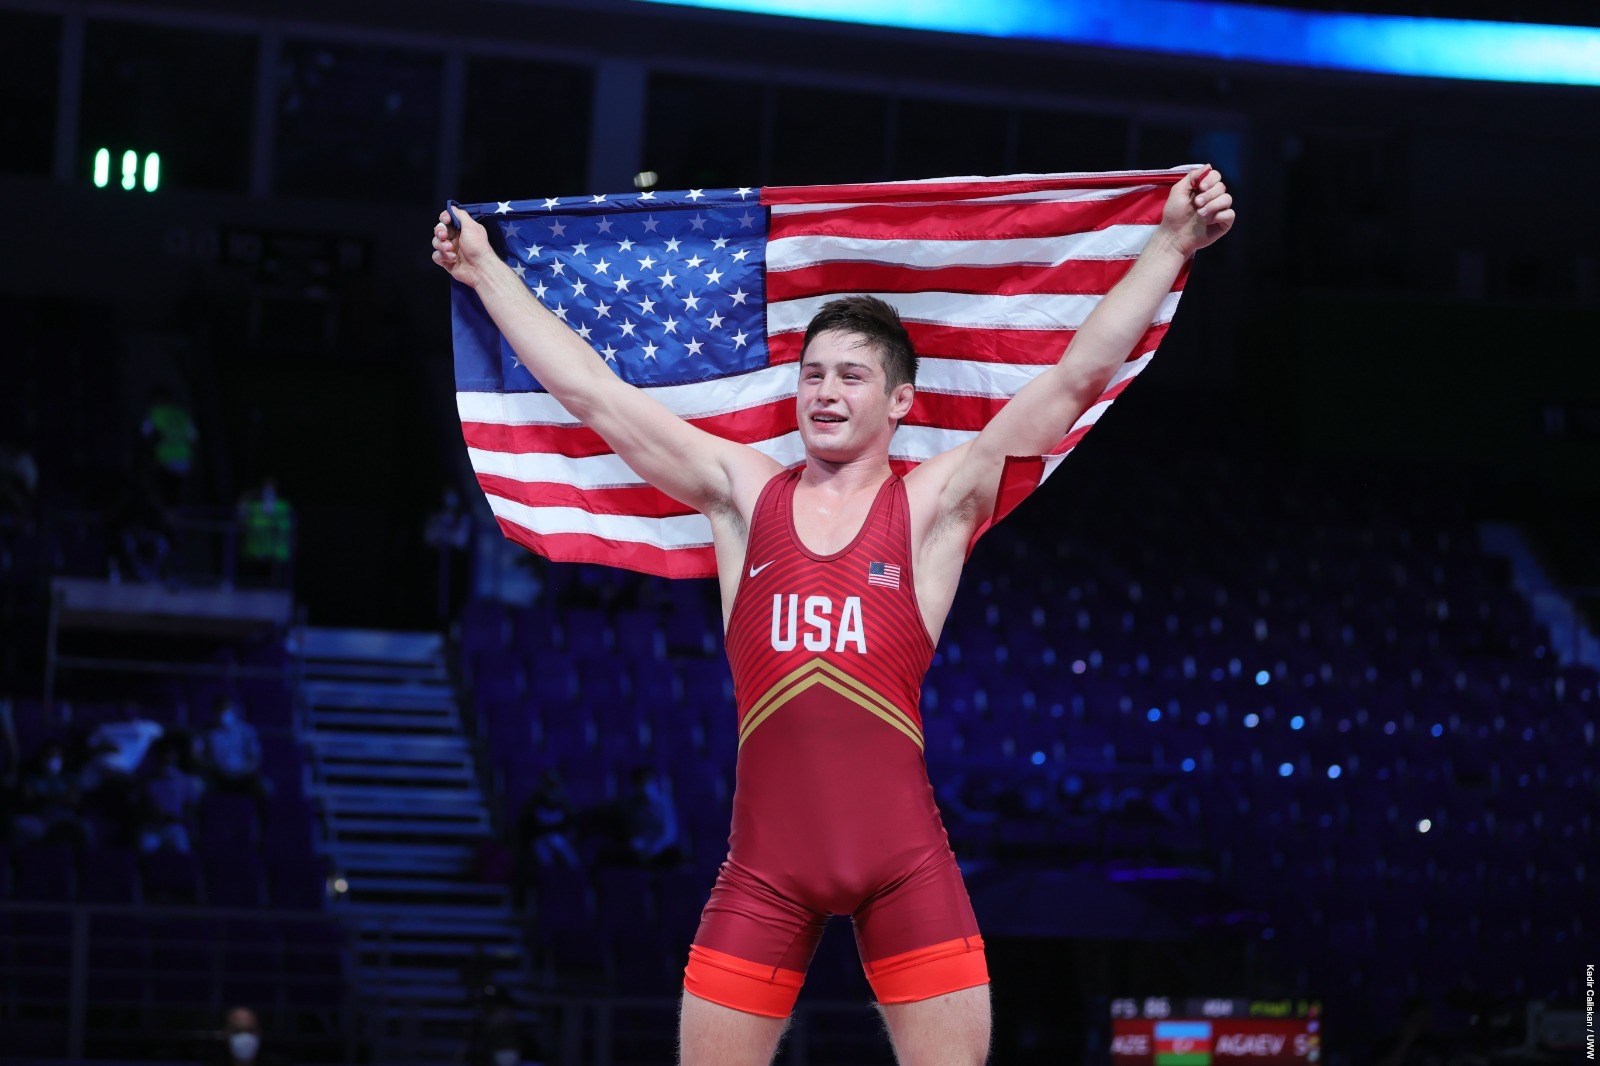 Keegan O'Toole holds the American flag up after winning the Junior World Championship